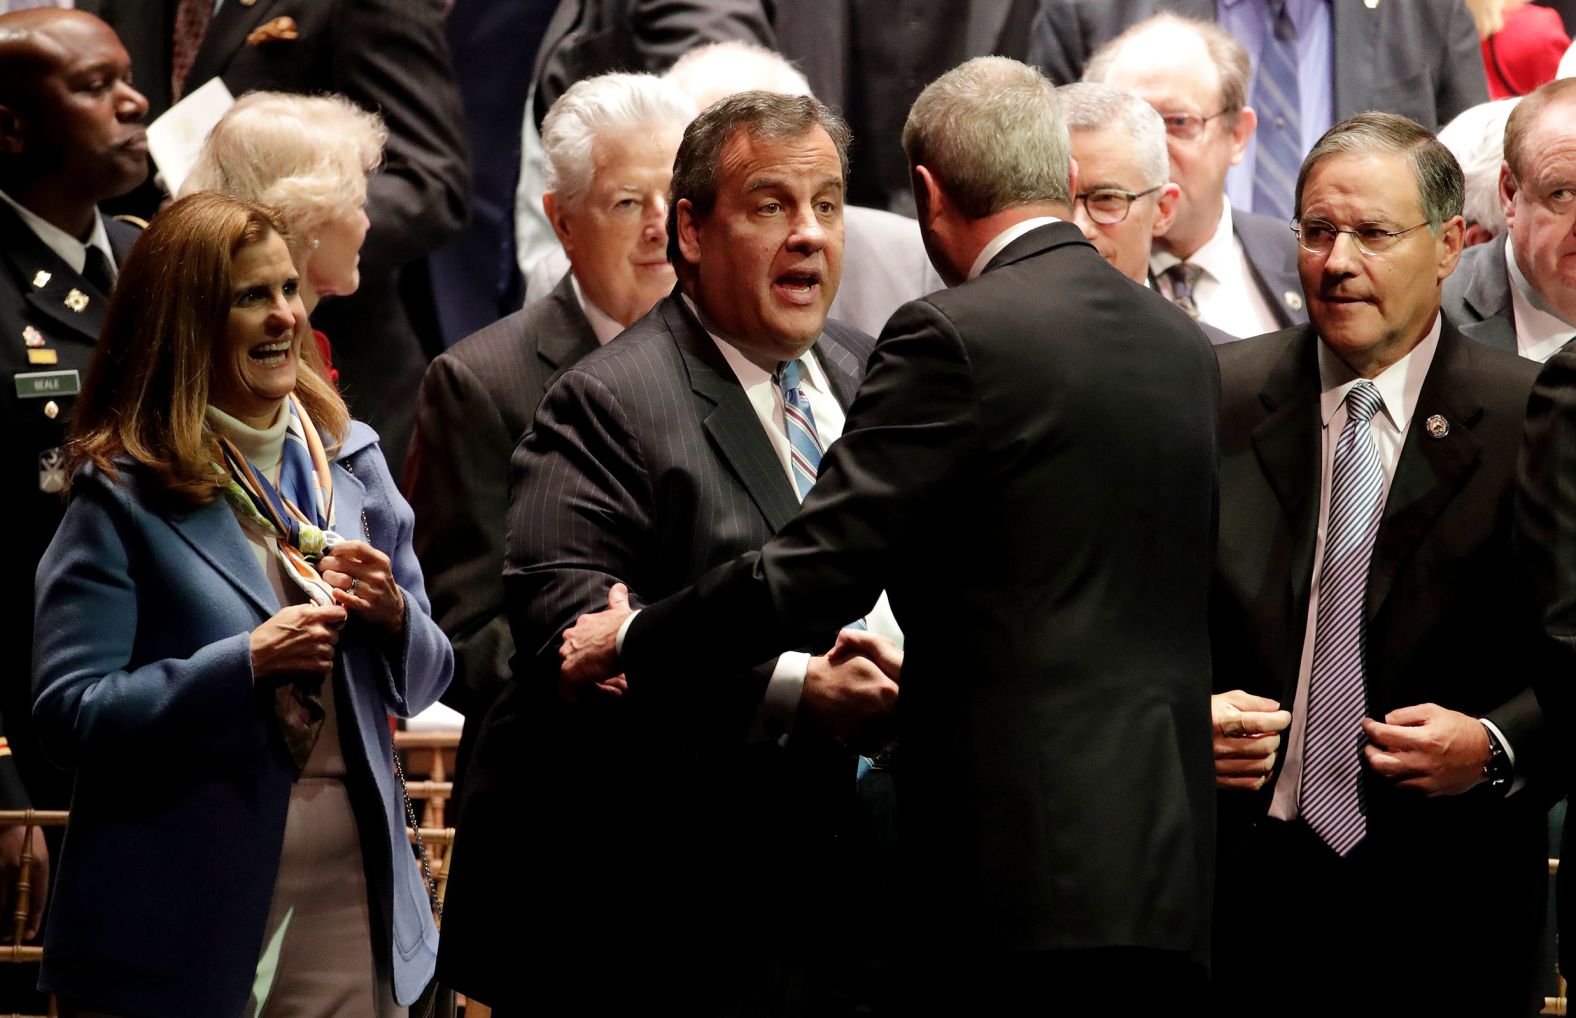 Christie shakes hands with his successor, Phil Murphy, after Murphy was sworn in as governor in January 2018.